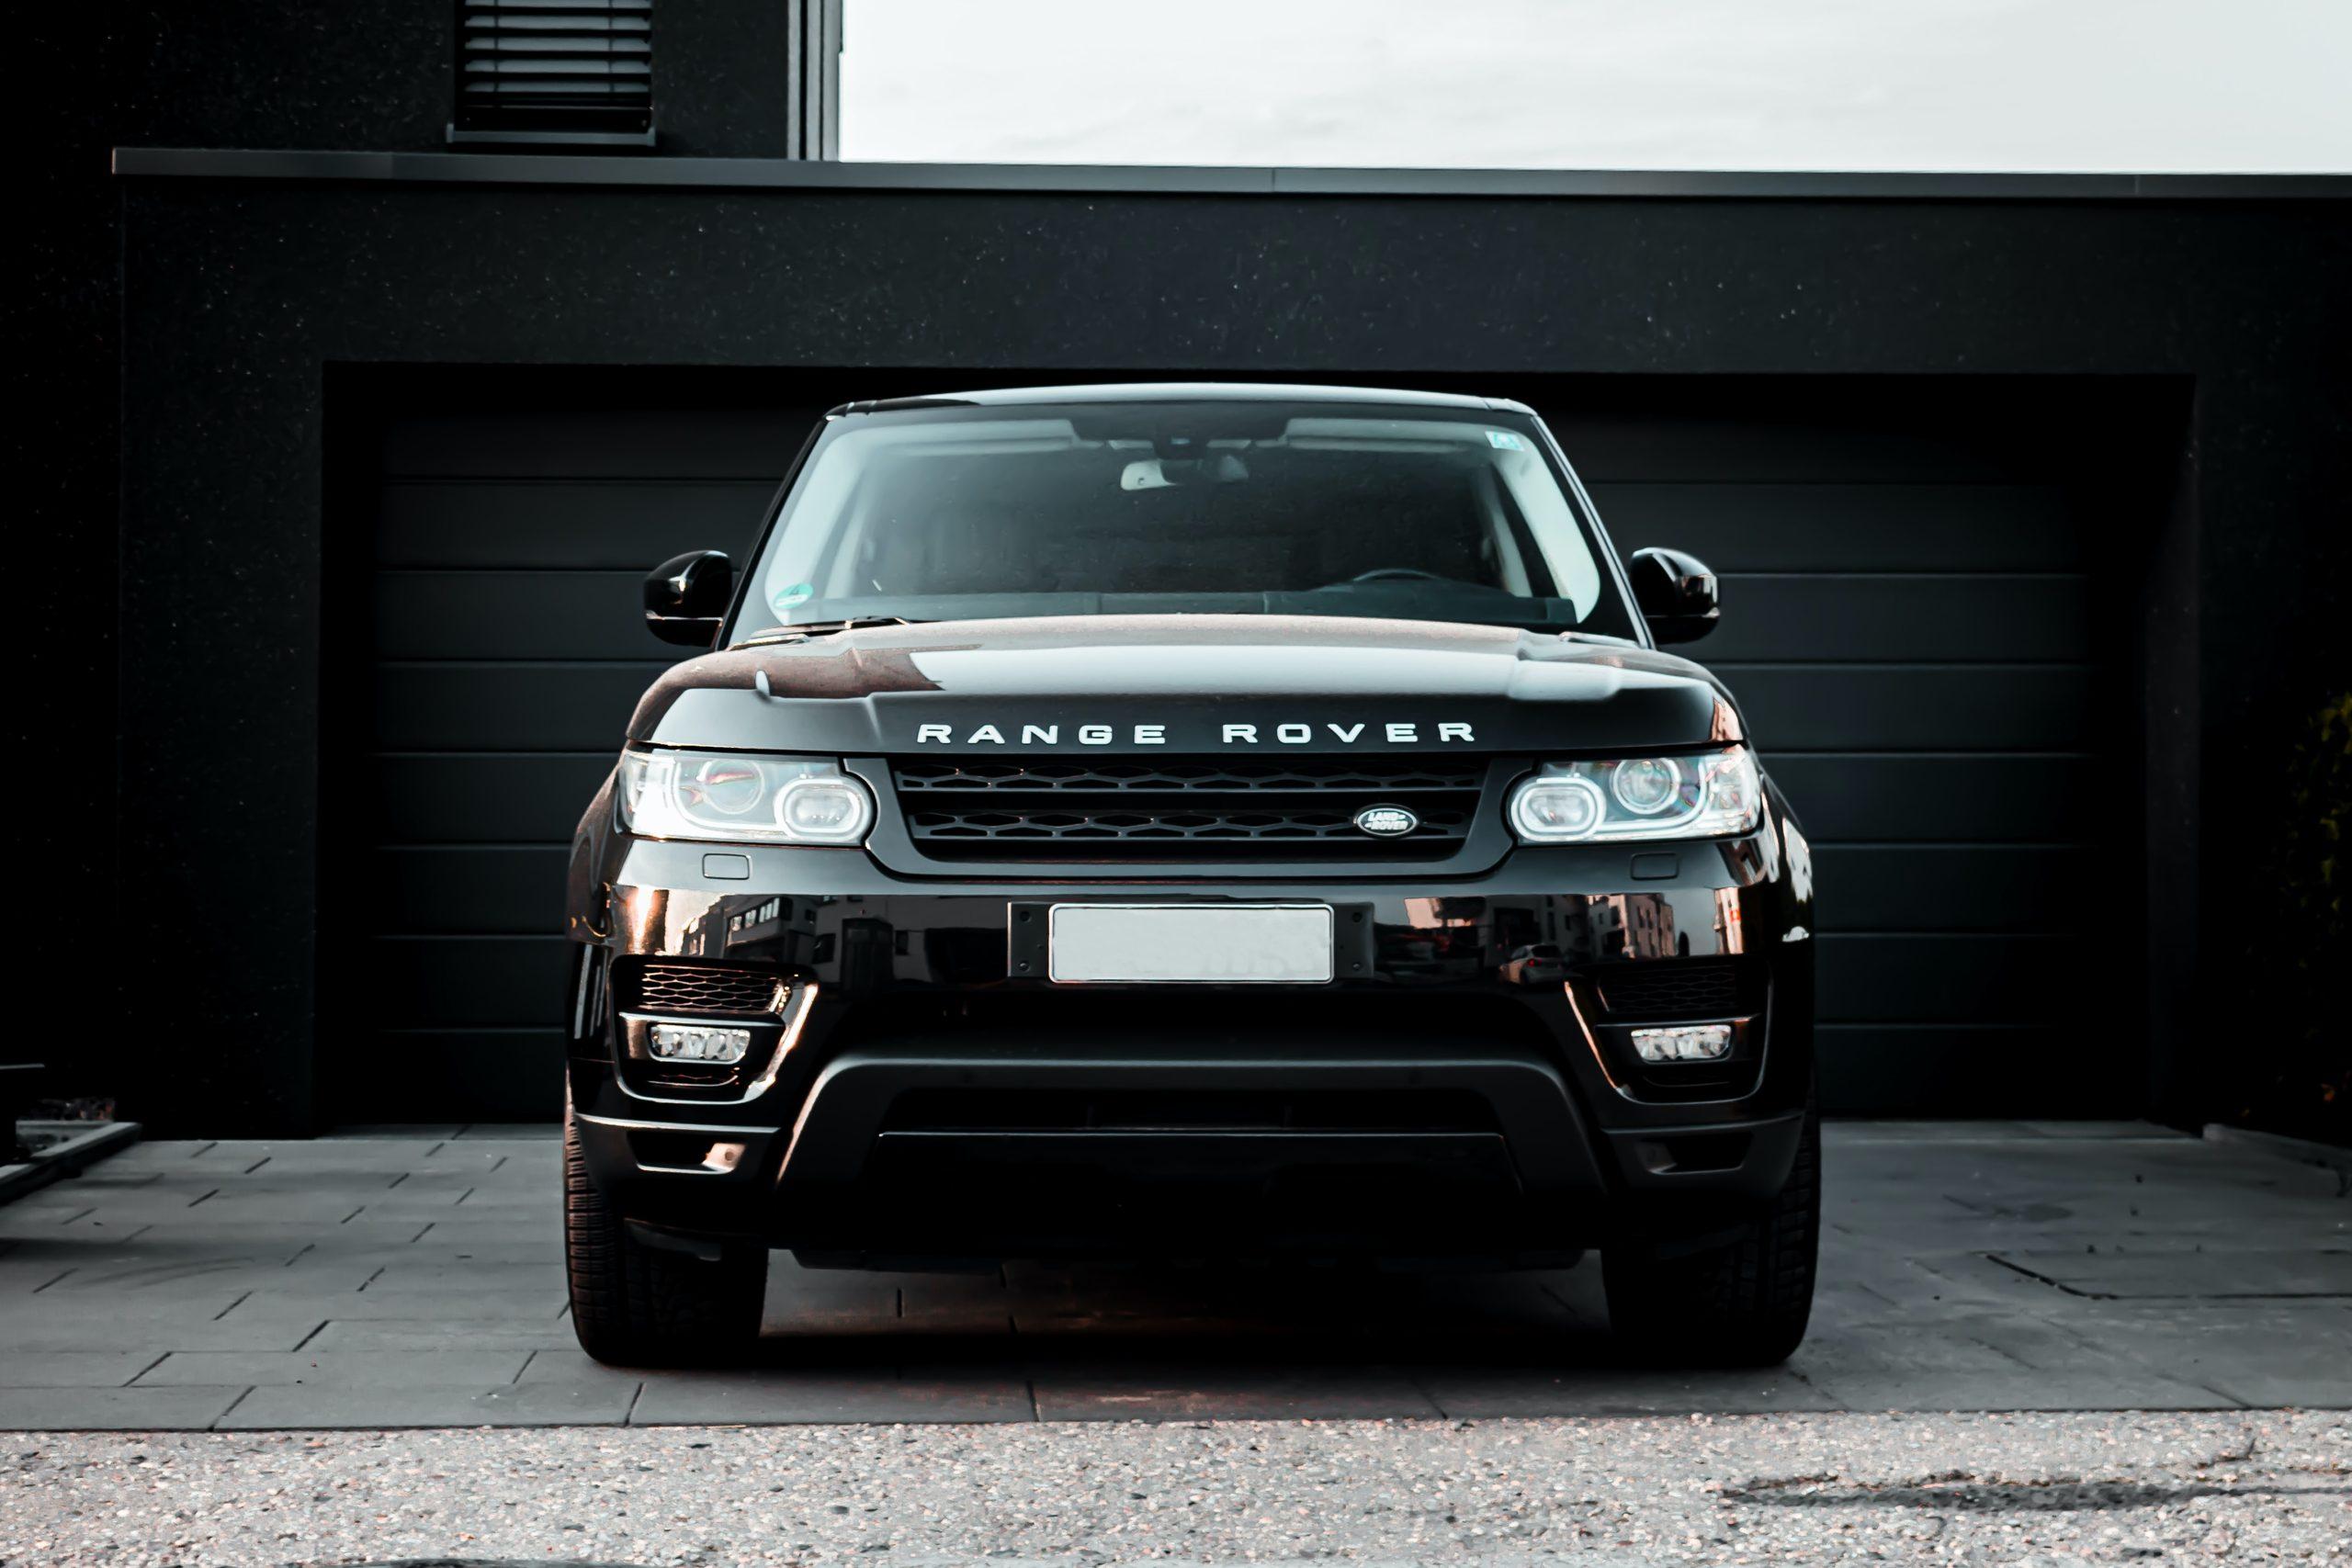 waiting for the next range rover service interval by a land rover specialist in cheshire